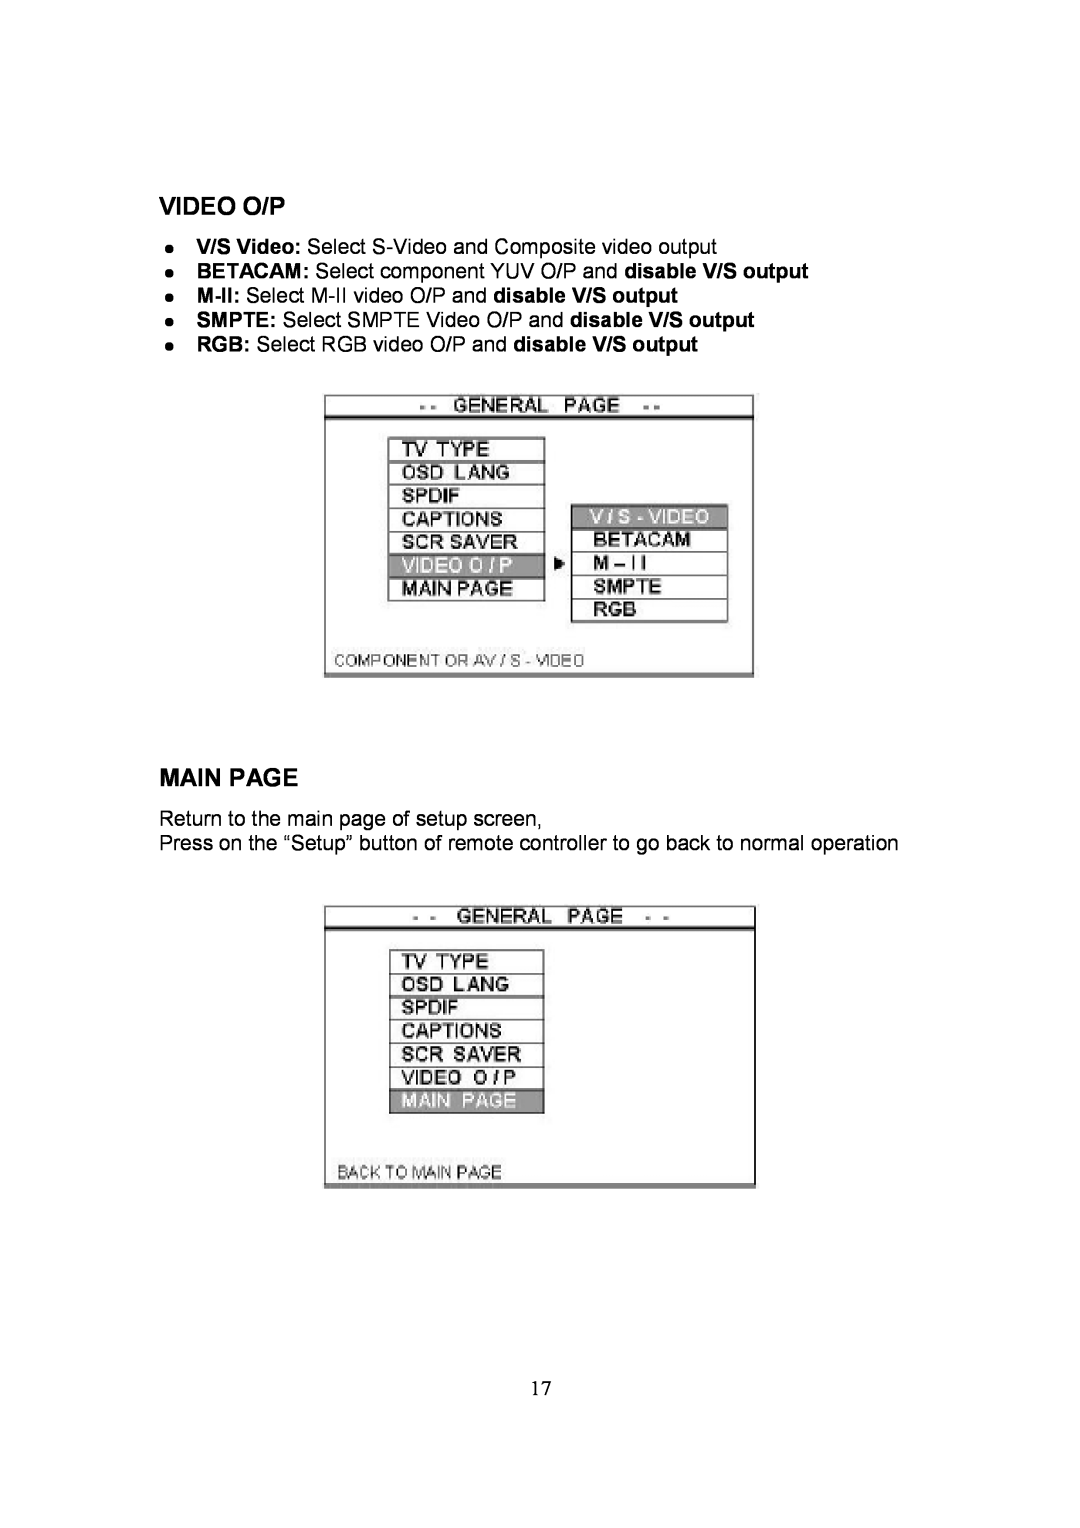 Datavideo CP-100 PRO instruction manual Video O/P, Main Page 